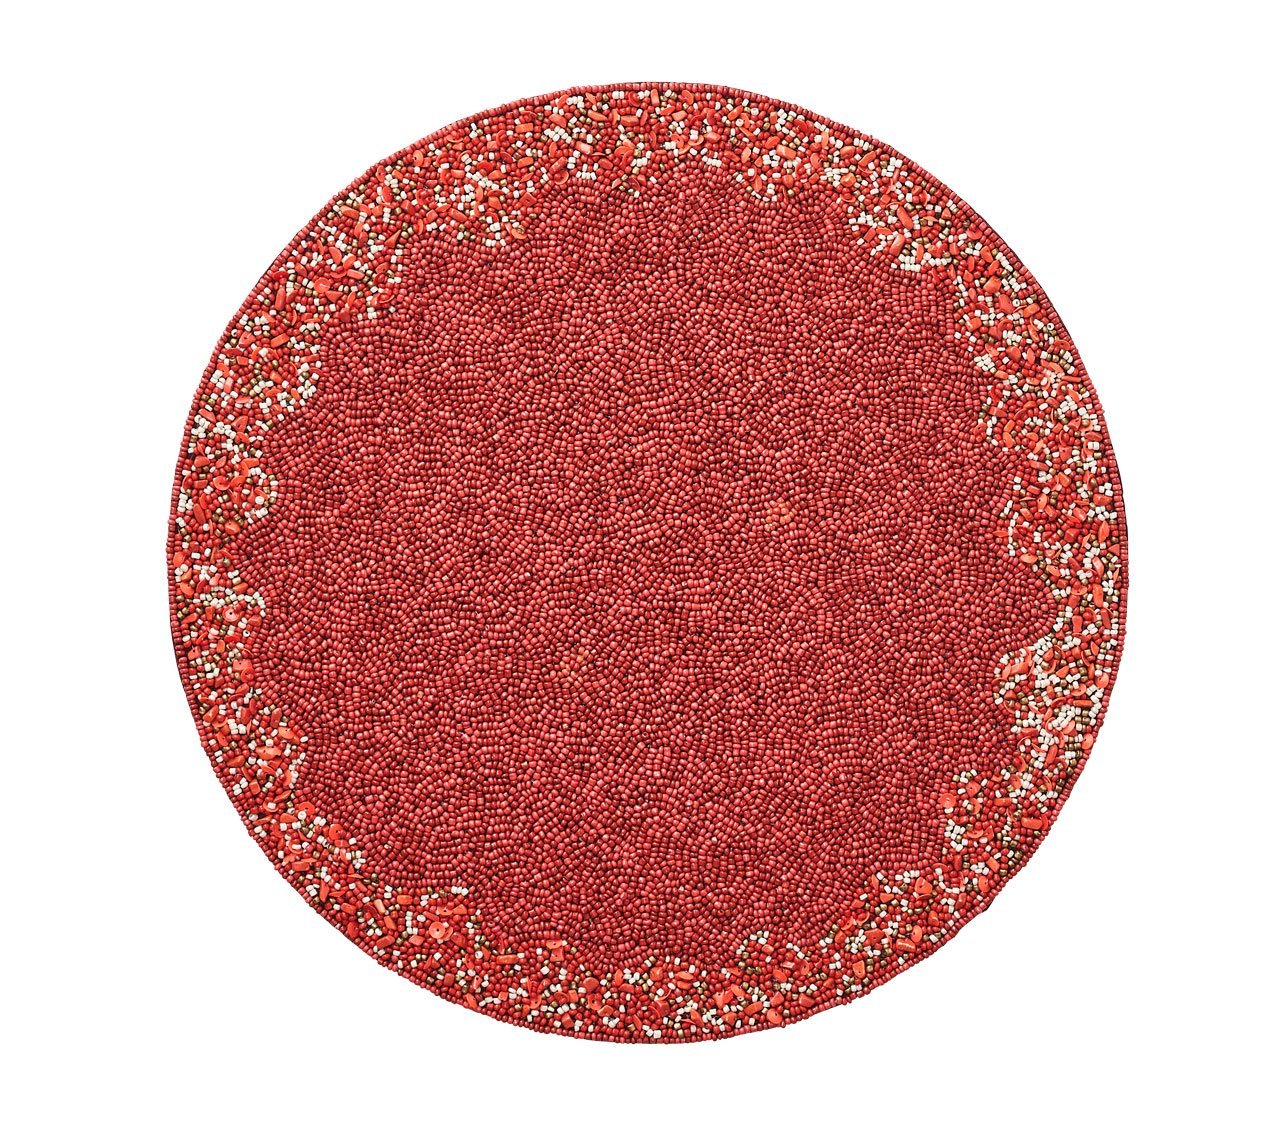 Kim Seybert Luxury Maui Placemat in Coral & Gold